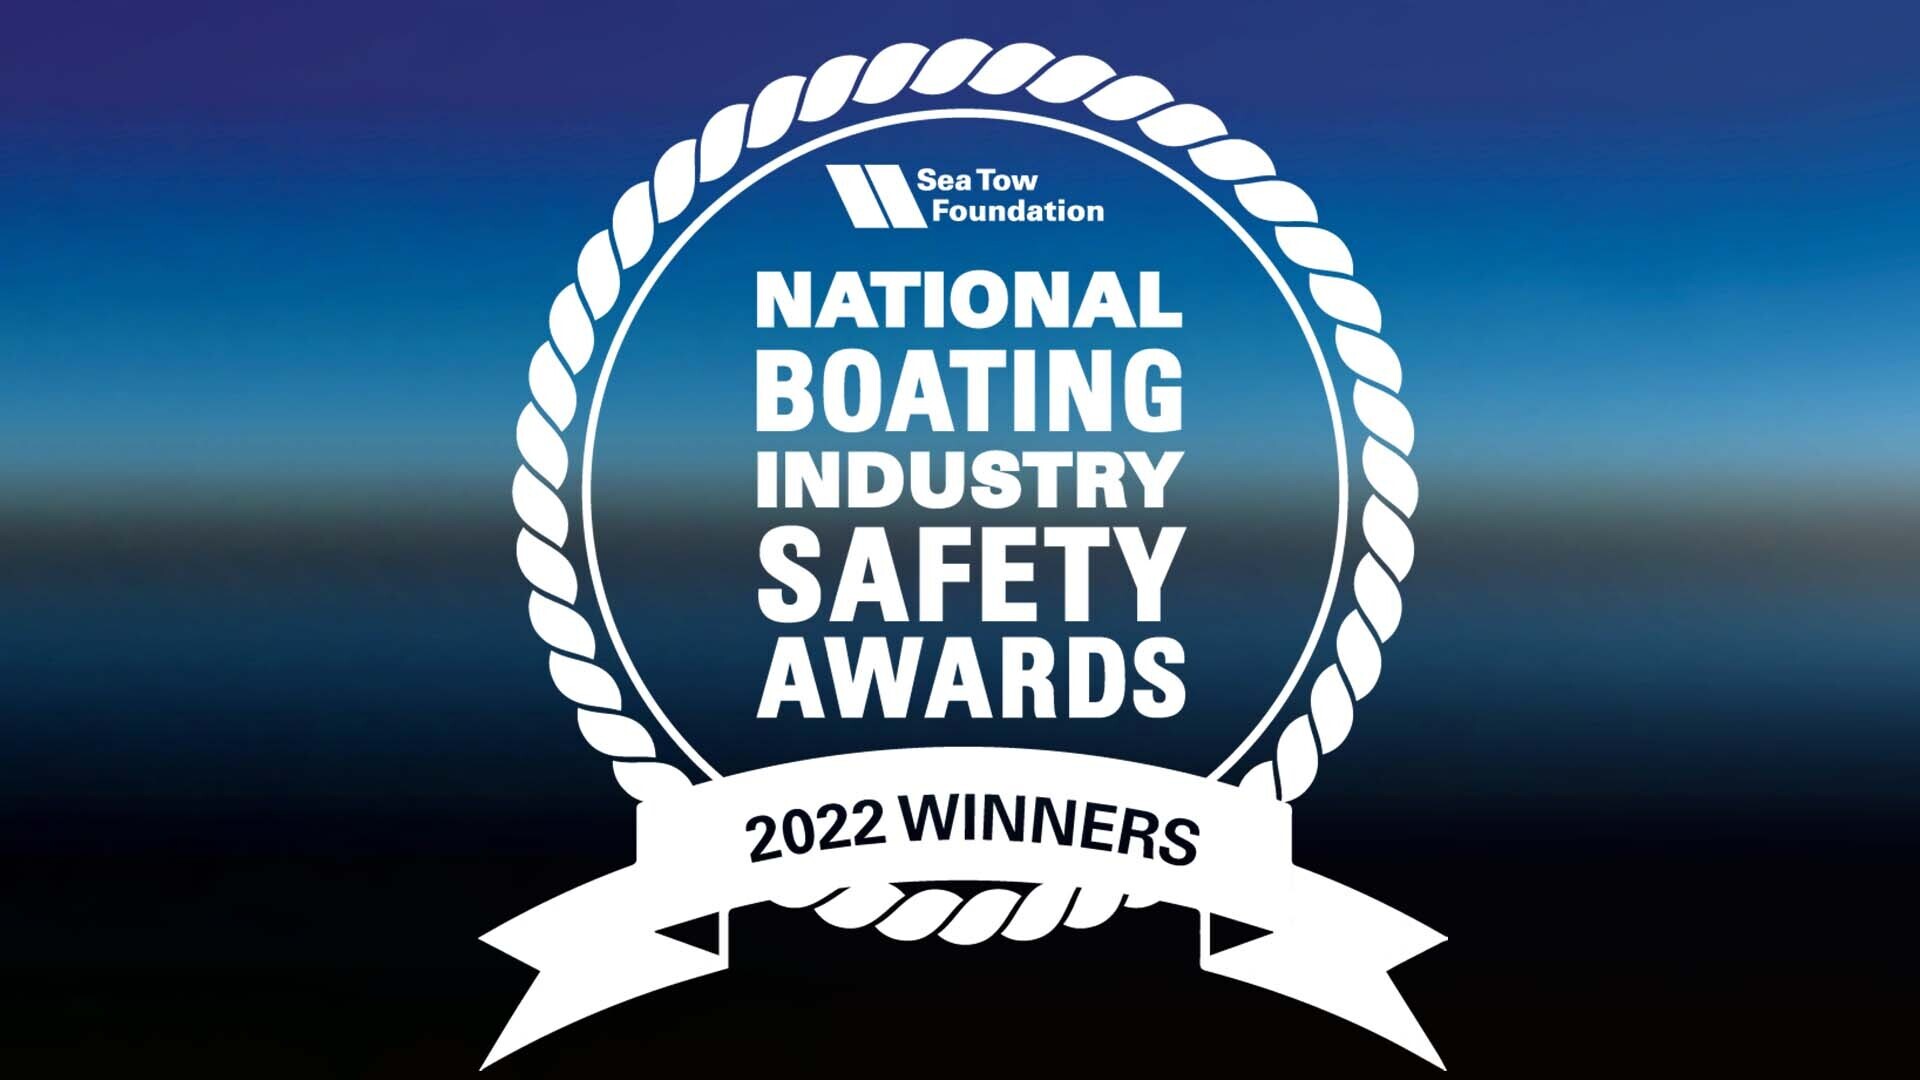 Sea Tow Foundation 2022 National Boating Industry Safety Award Winners graphic